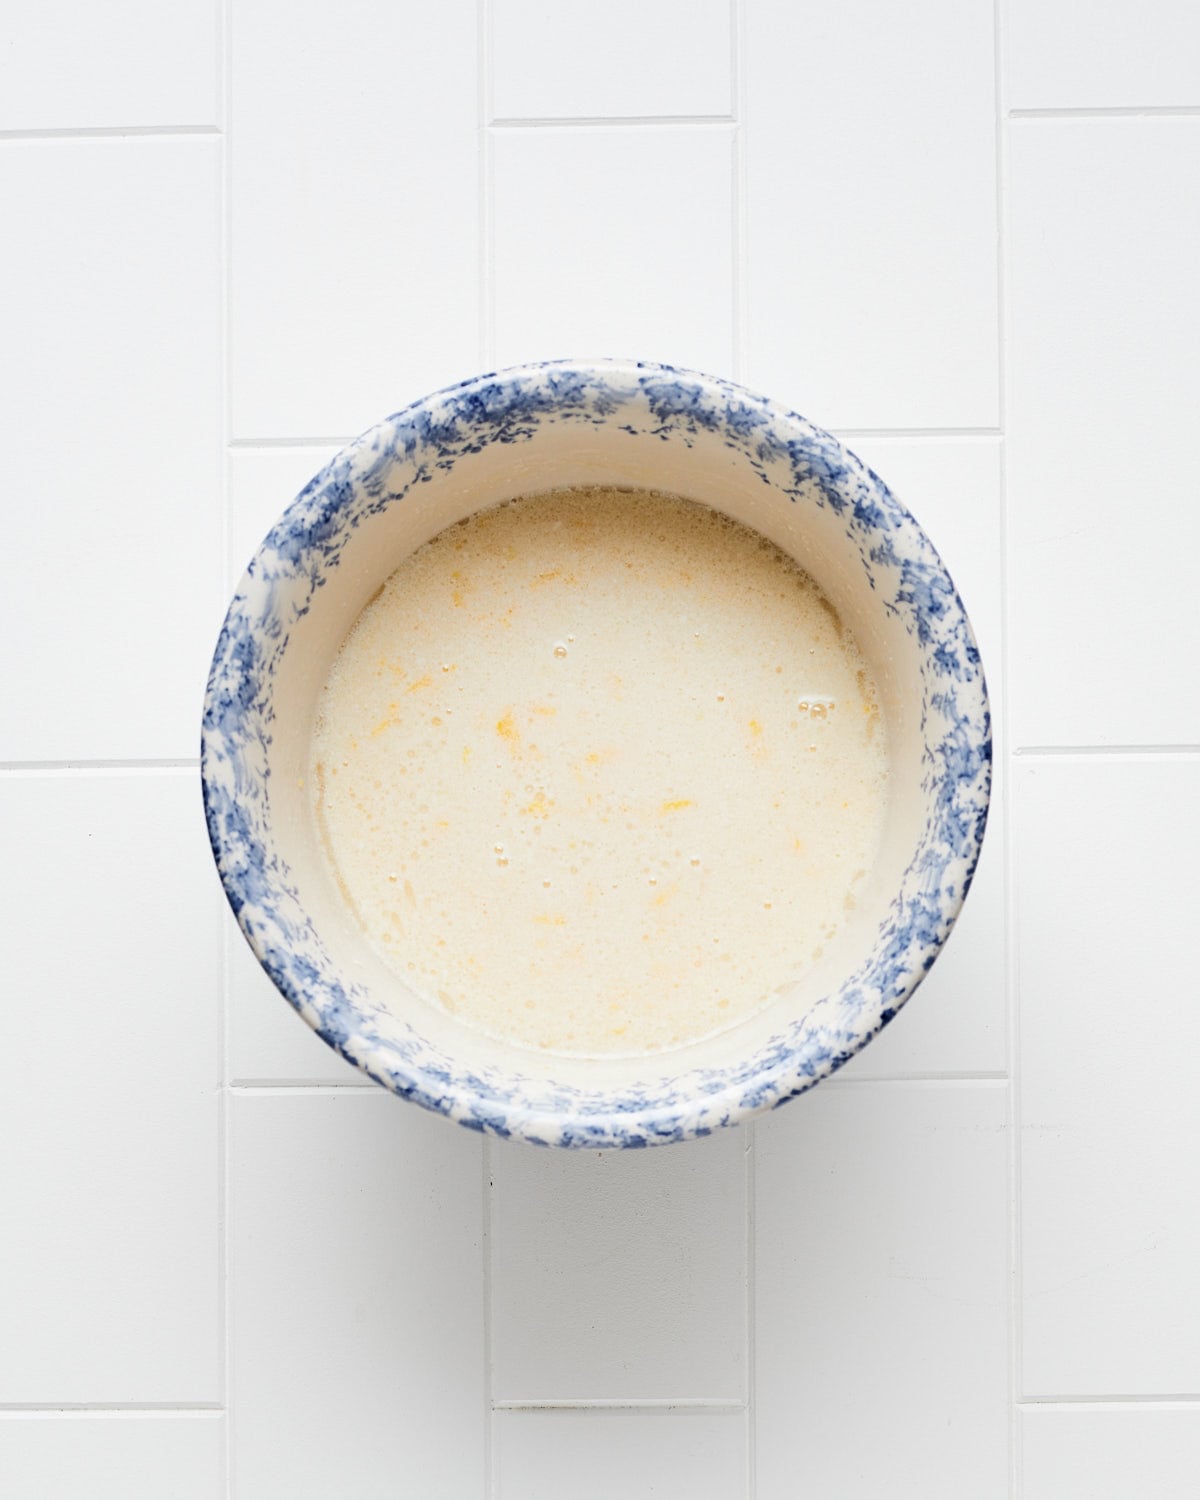 Overhead view of liquid ingredients in a bowl on a while tile surface.